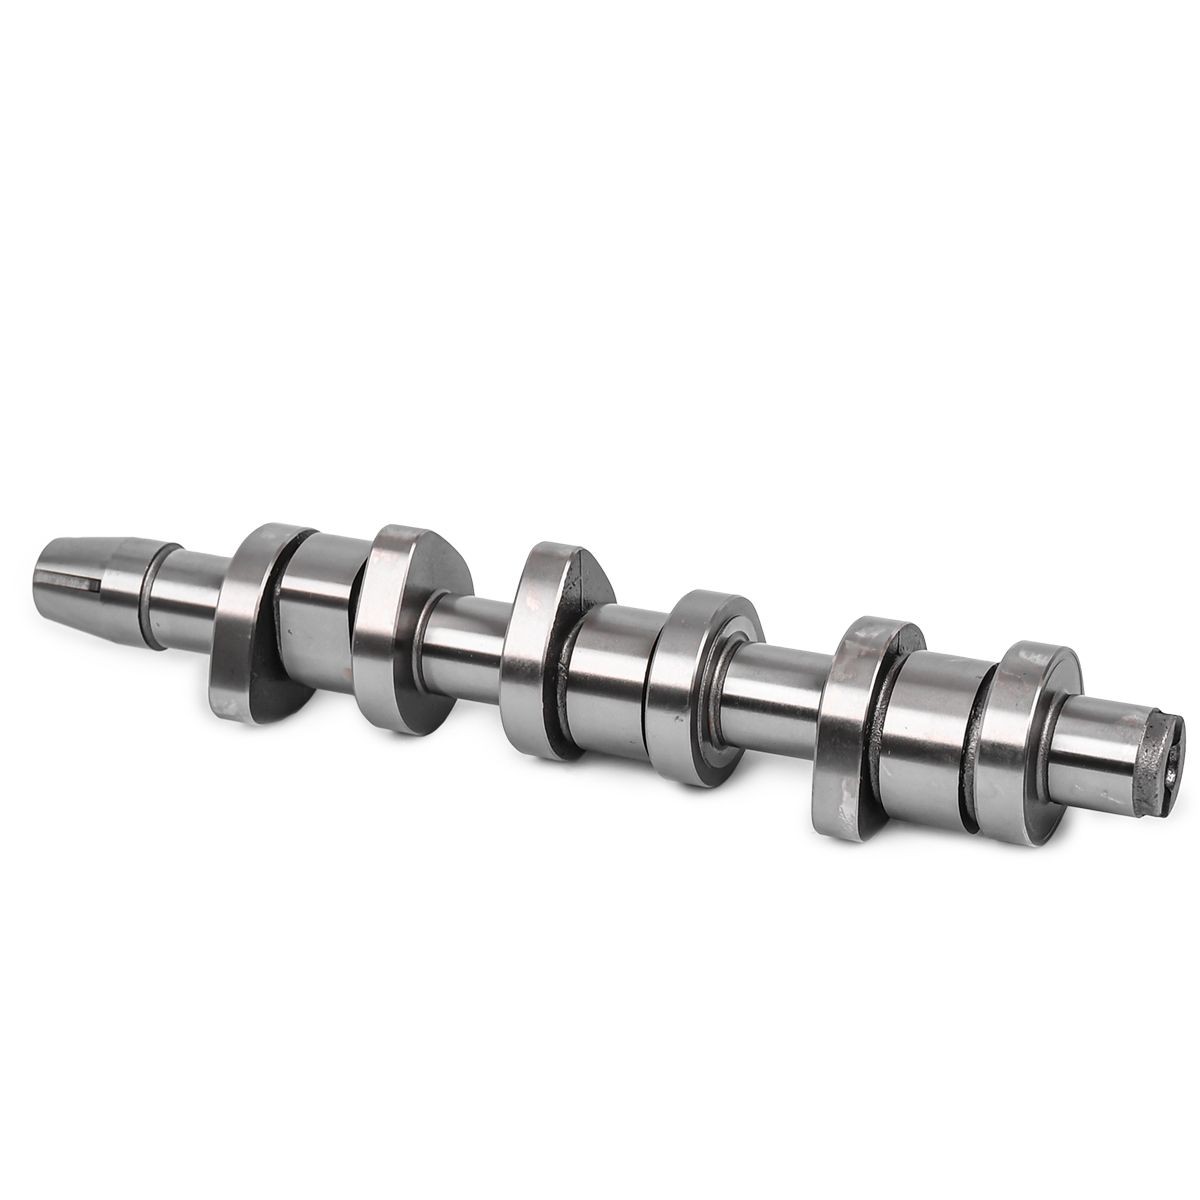 HV0355 ET ENGINETEAM Camshaft Kit ▷ AUTODOC price and review